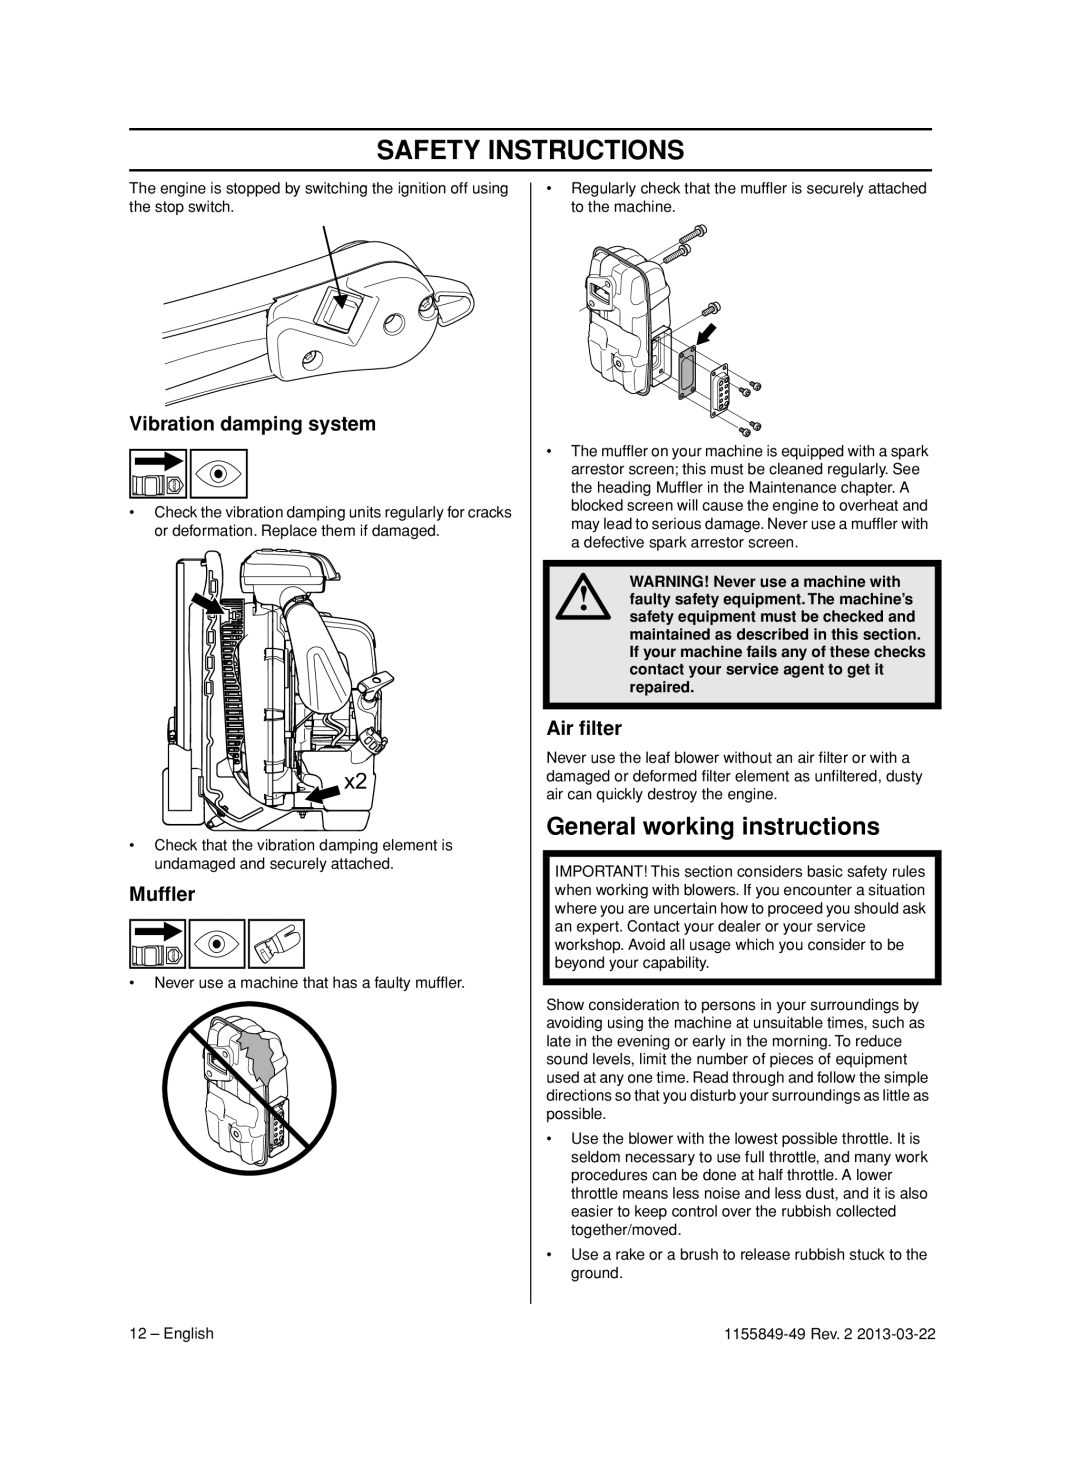 Husqvarna 966629501 General working instructions, Air ﬁlter, Safety Instructions, Vibration damping system, Mufﬂer 